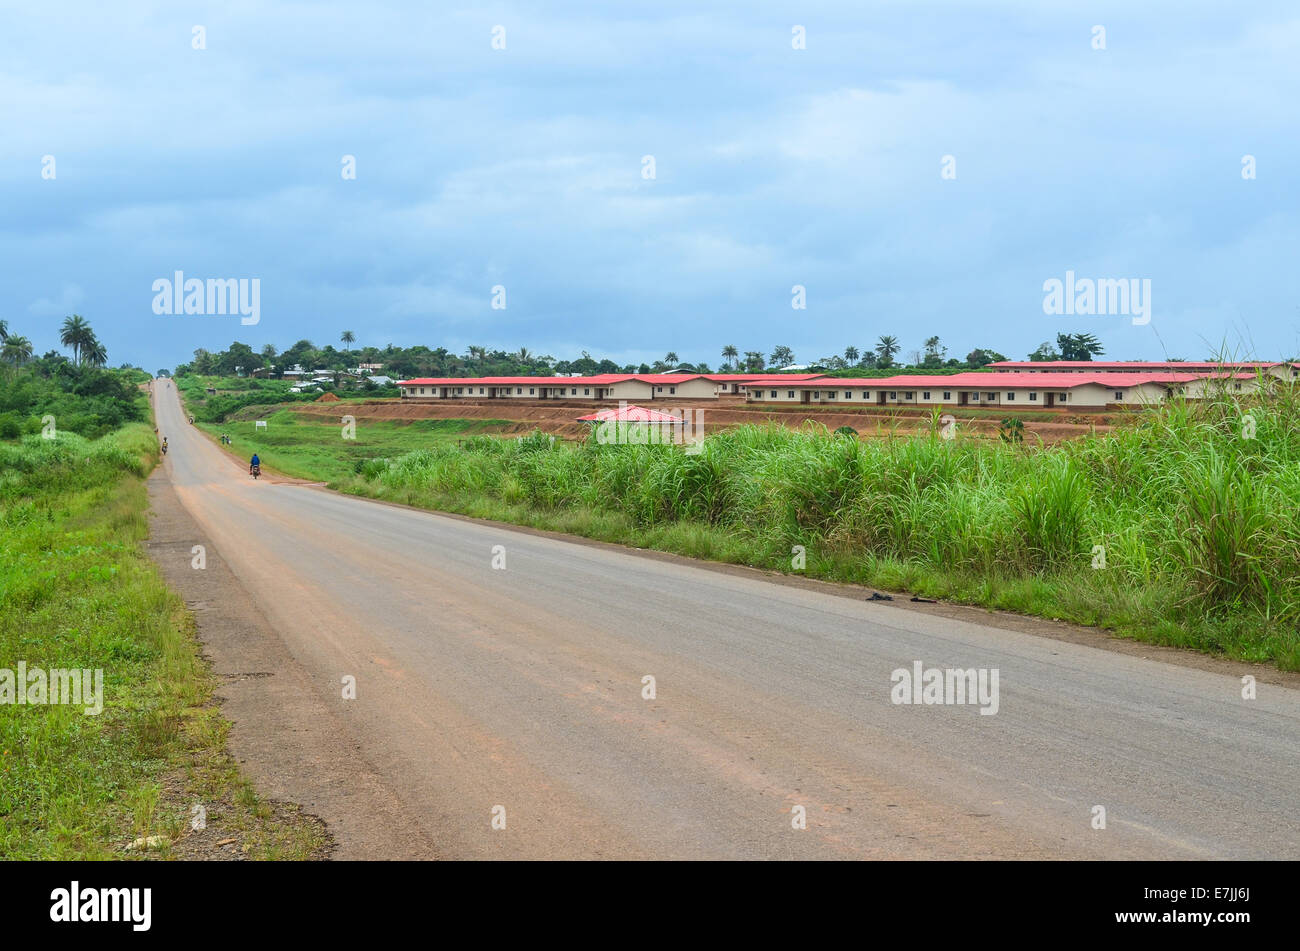 Offices and workers compound of the Sime Darby (a major Malaysian multinational conglomerate) palm oil plantation in Liberia Stock Photo